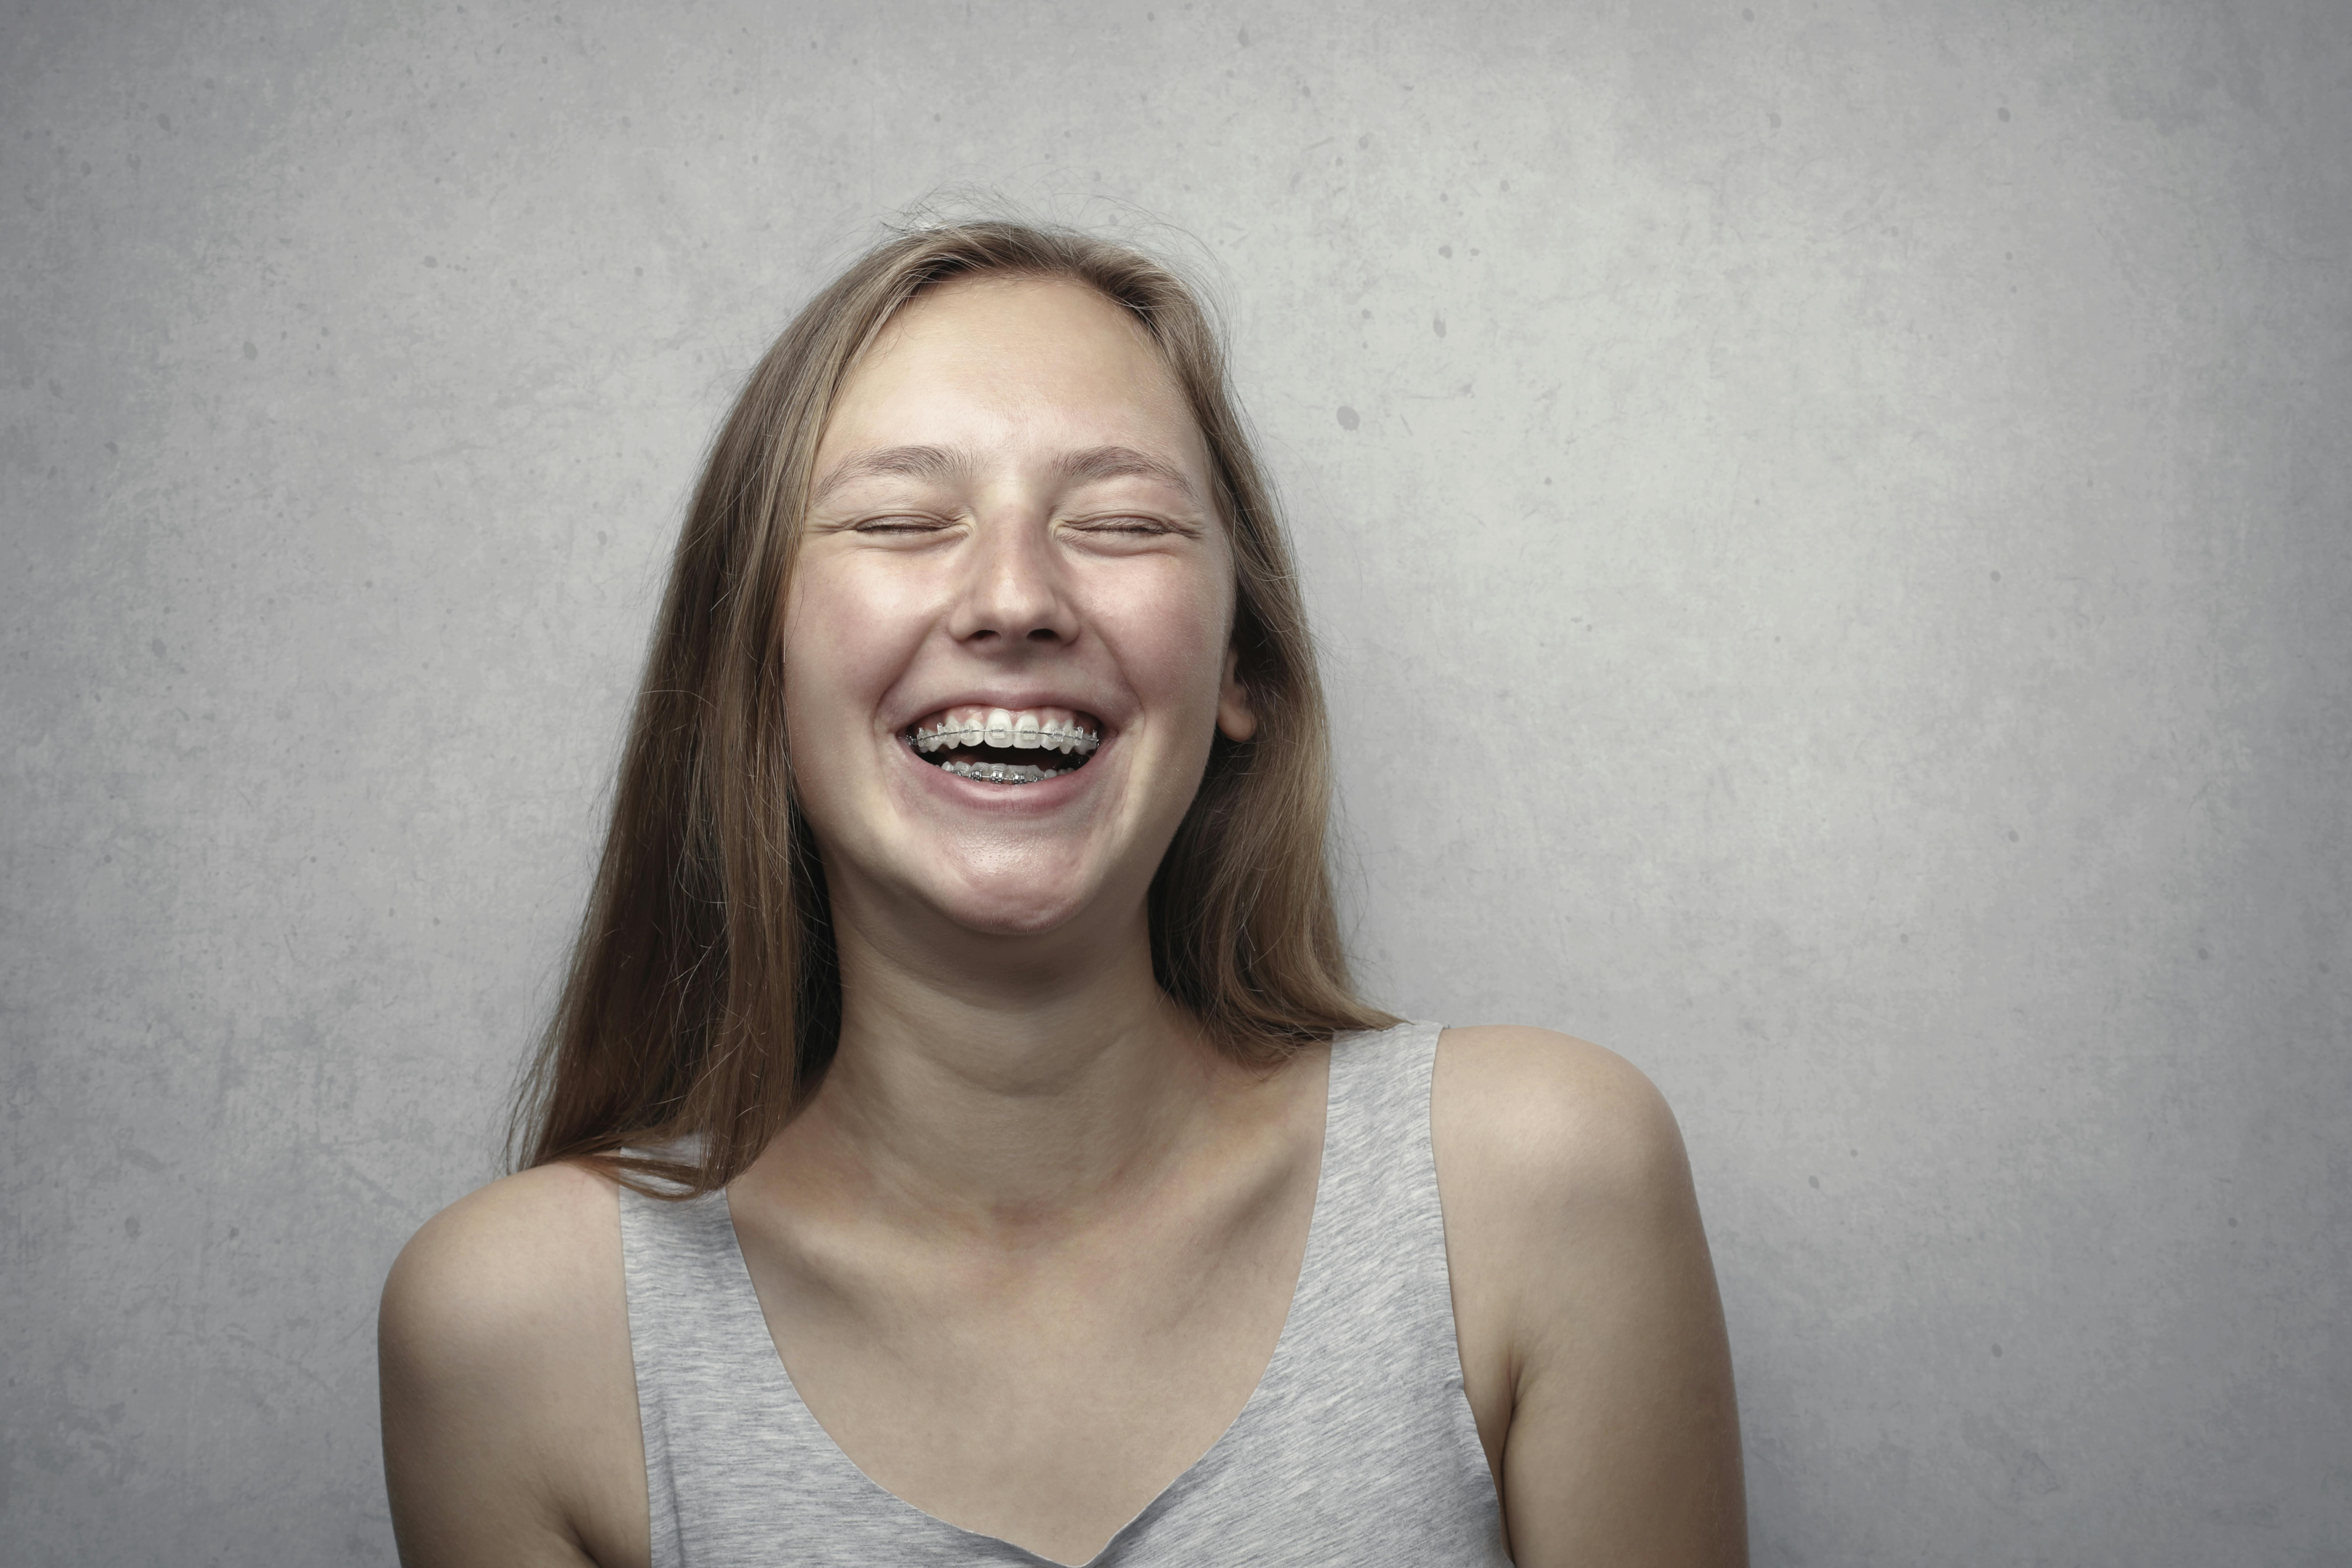 young woman with braces on her teeth to put them in the correct position